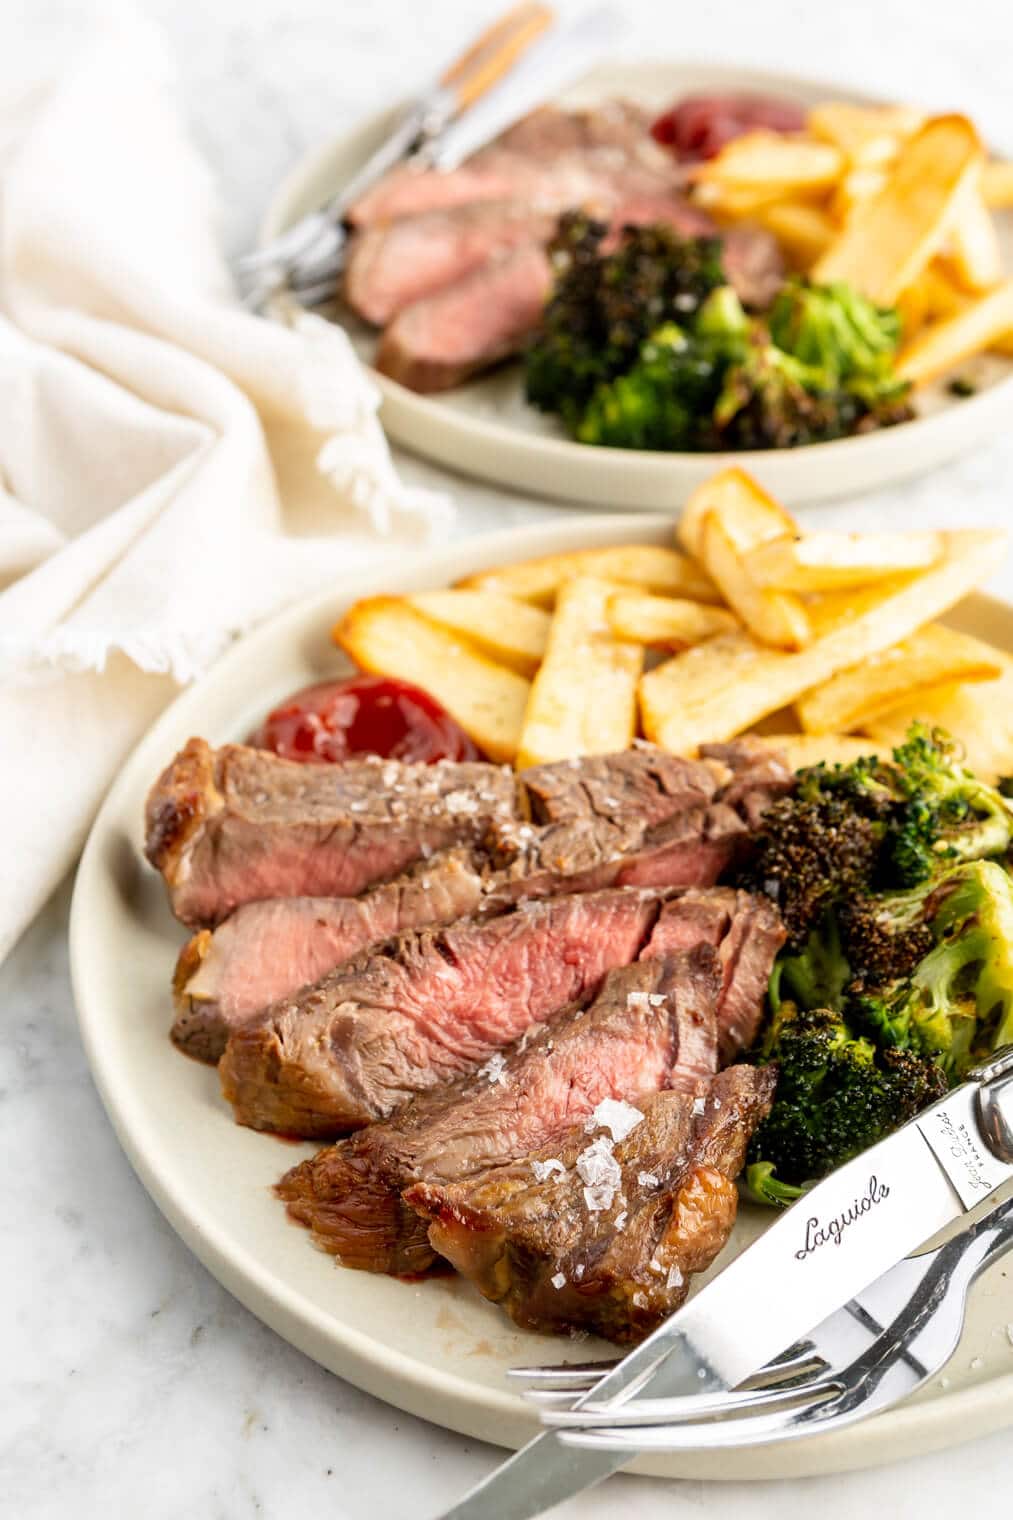 Two air fryer steak dinners plated with broccoli and steak fries.